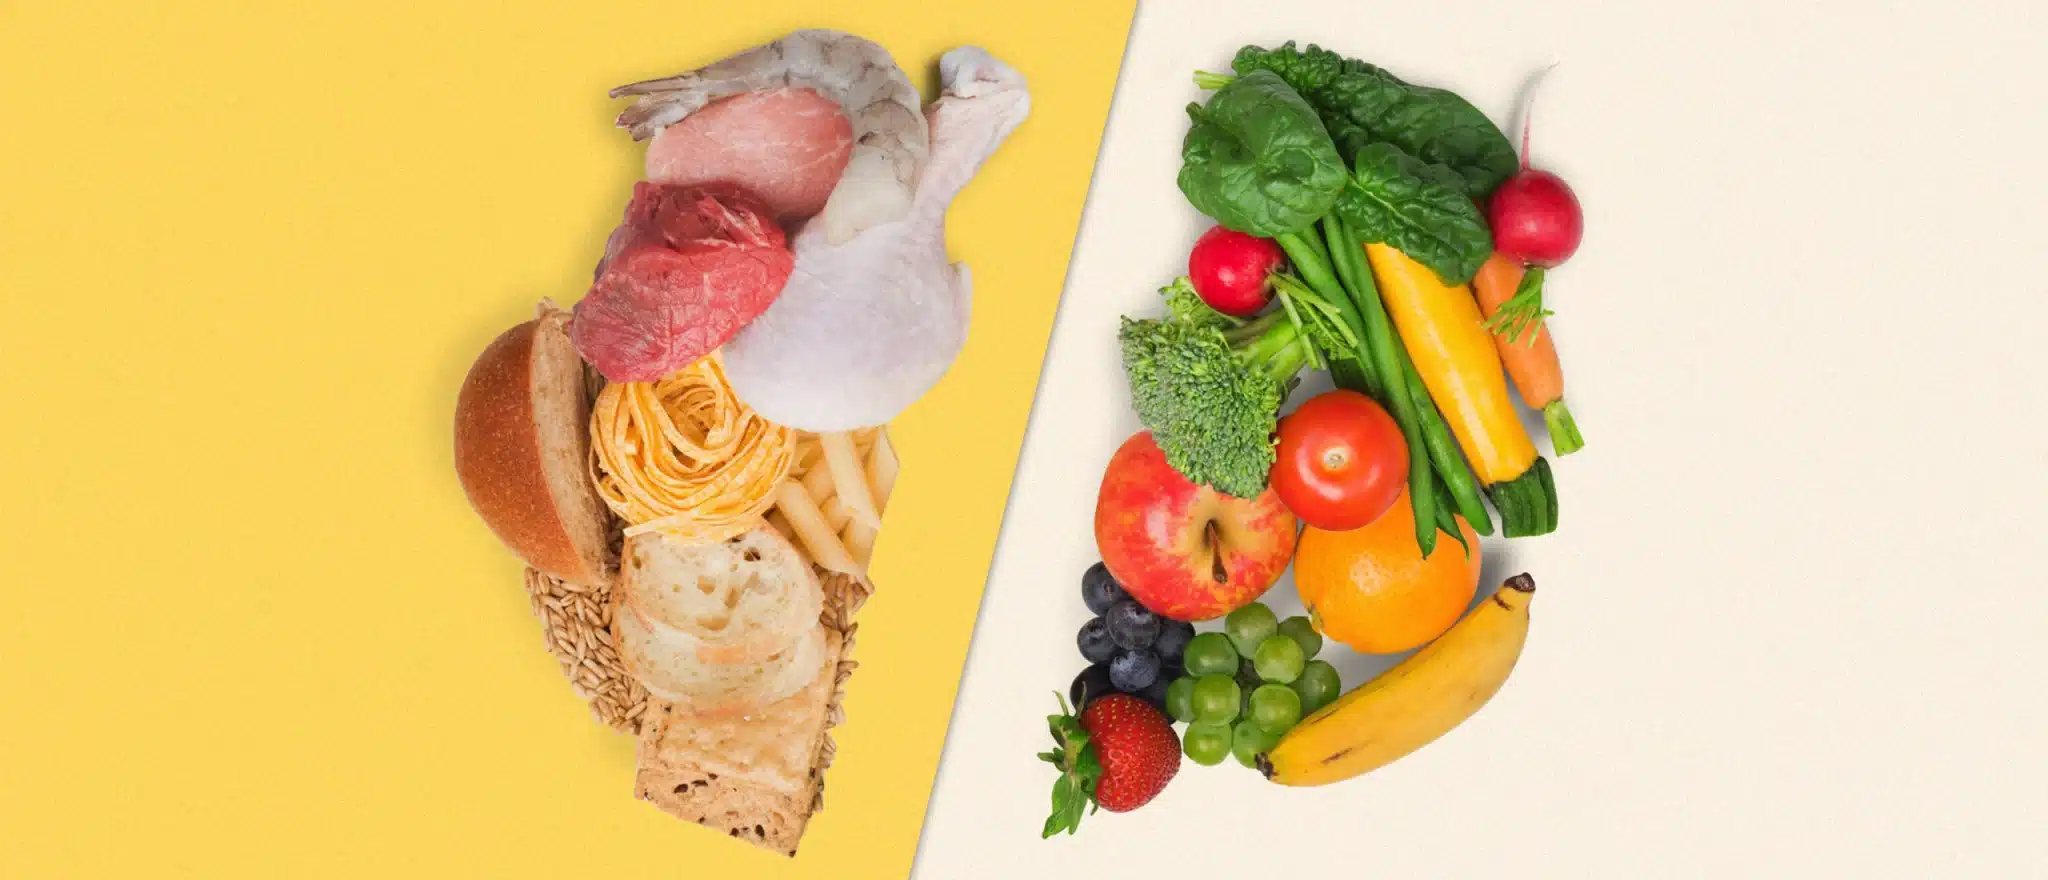 Macronutrients vs. Micronutrients: What’s the Difference?